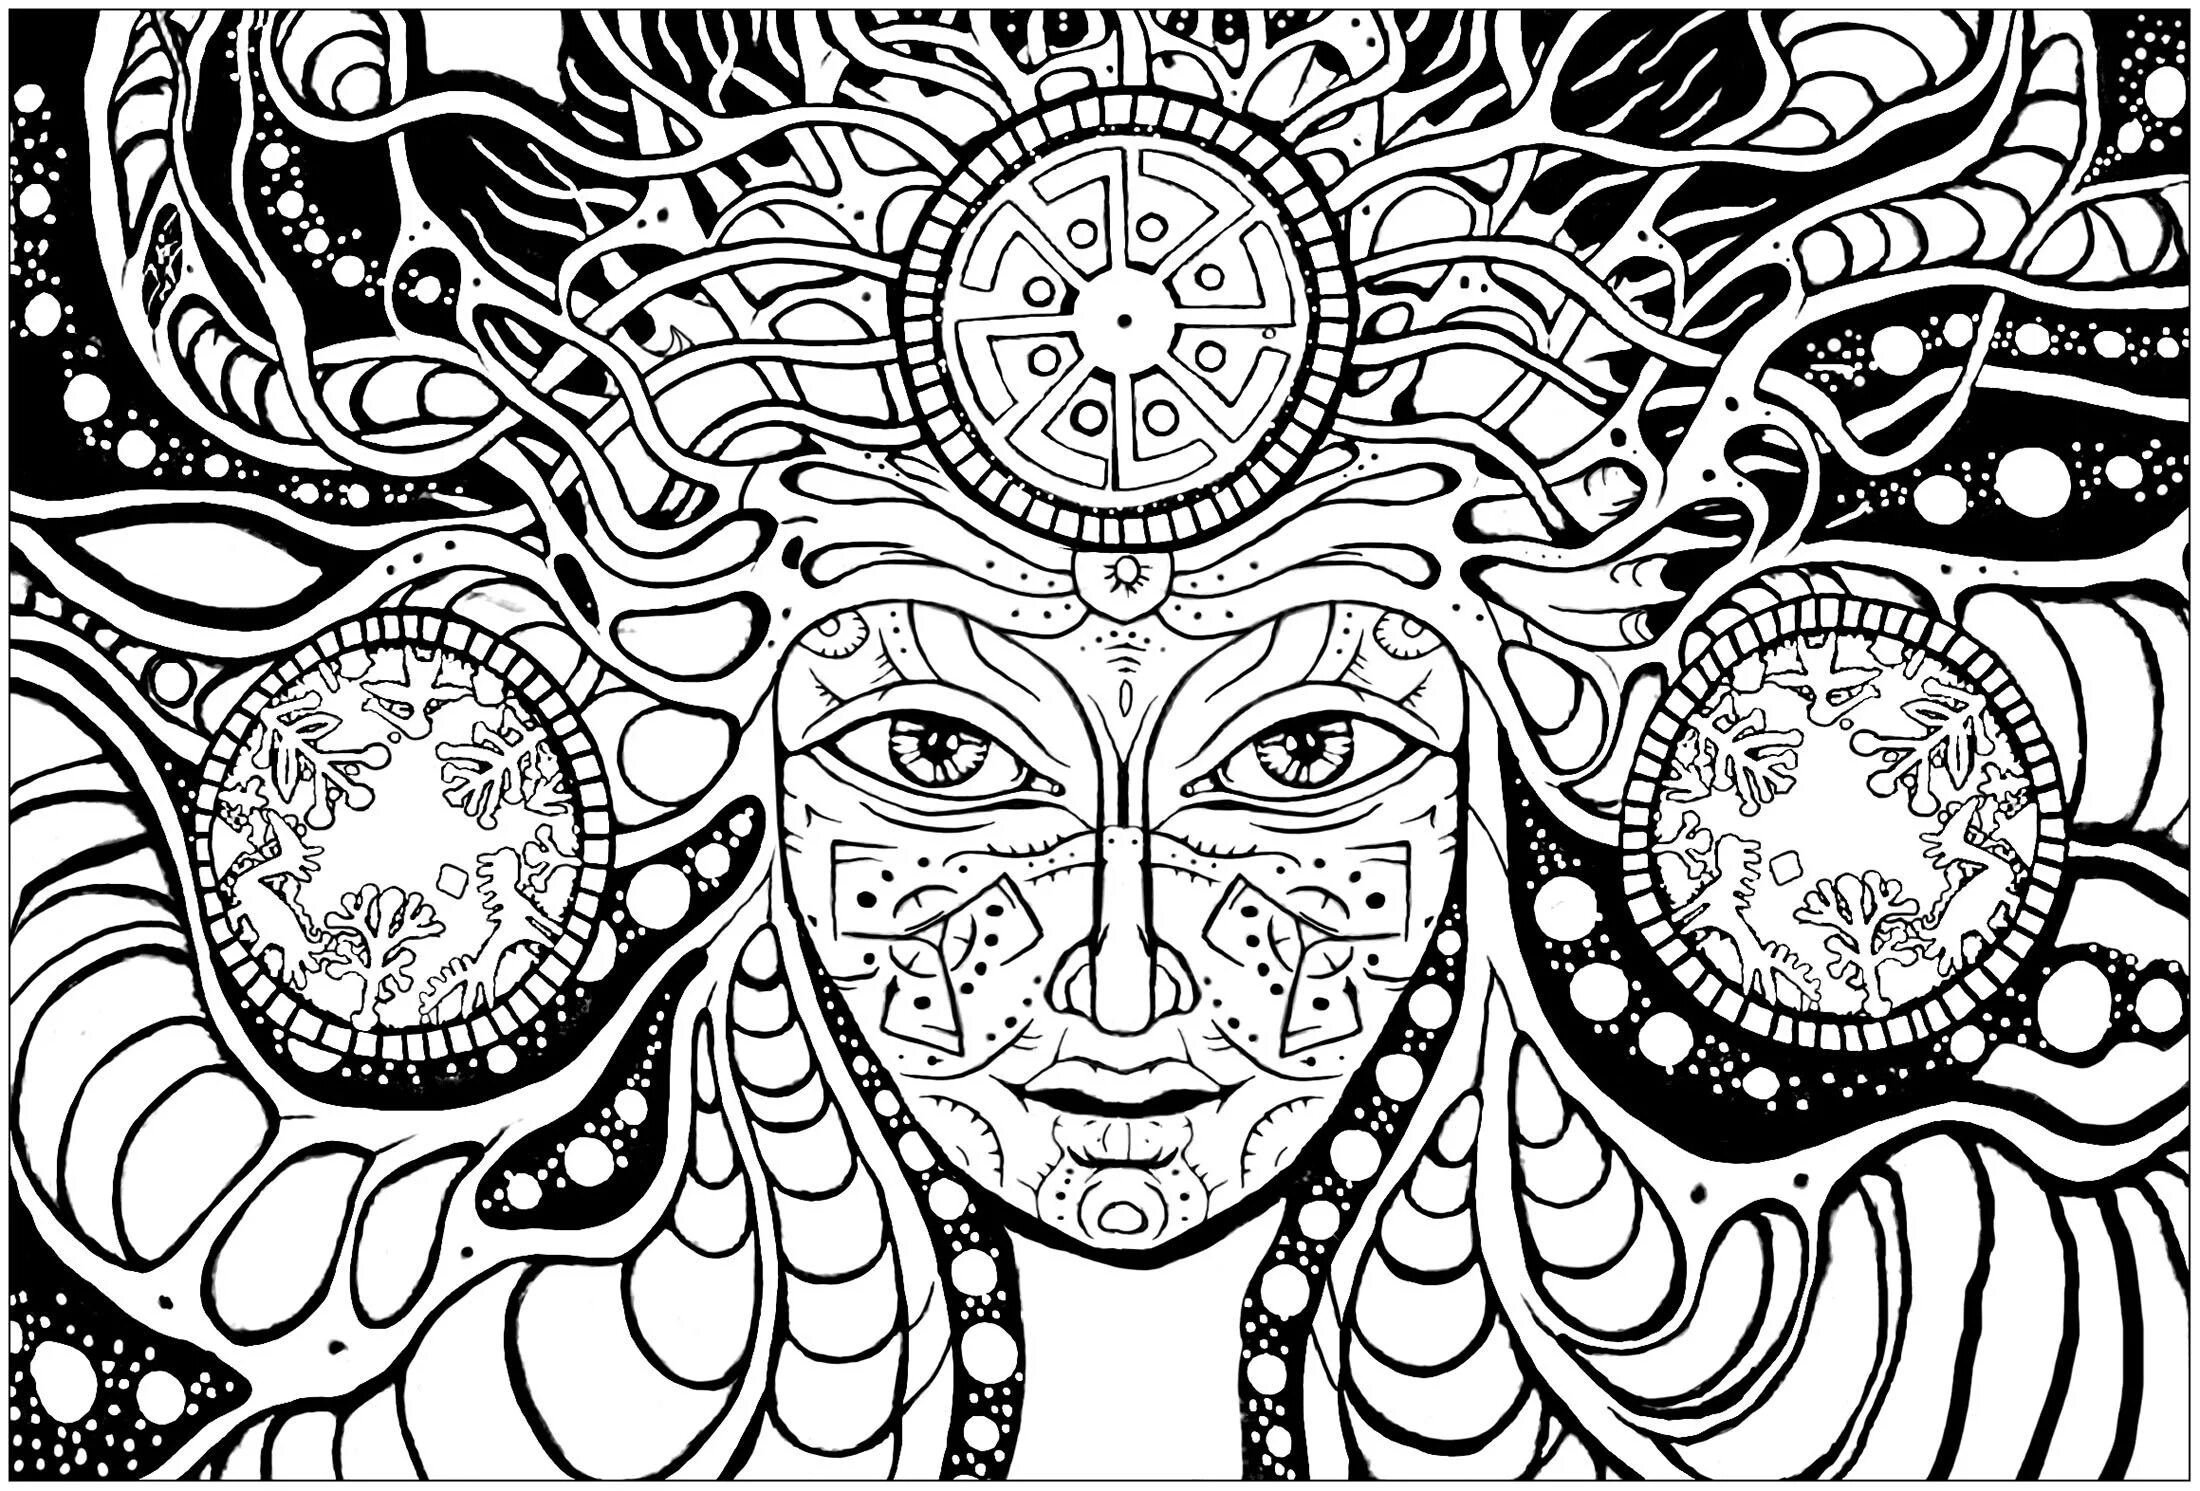 Rave psychedelic coloring book